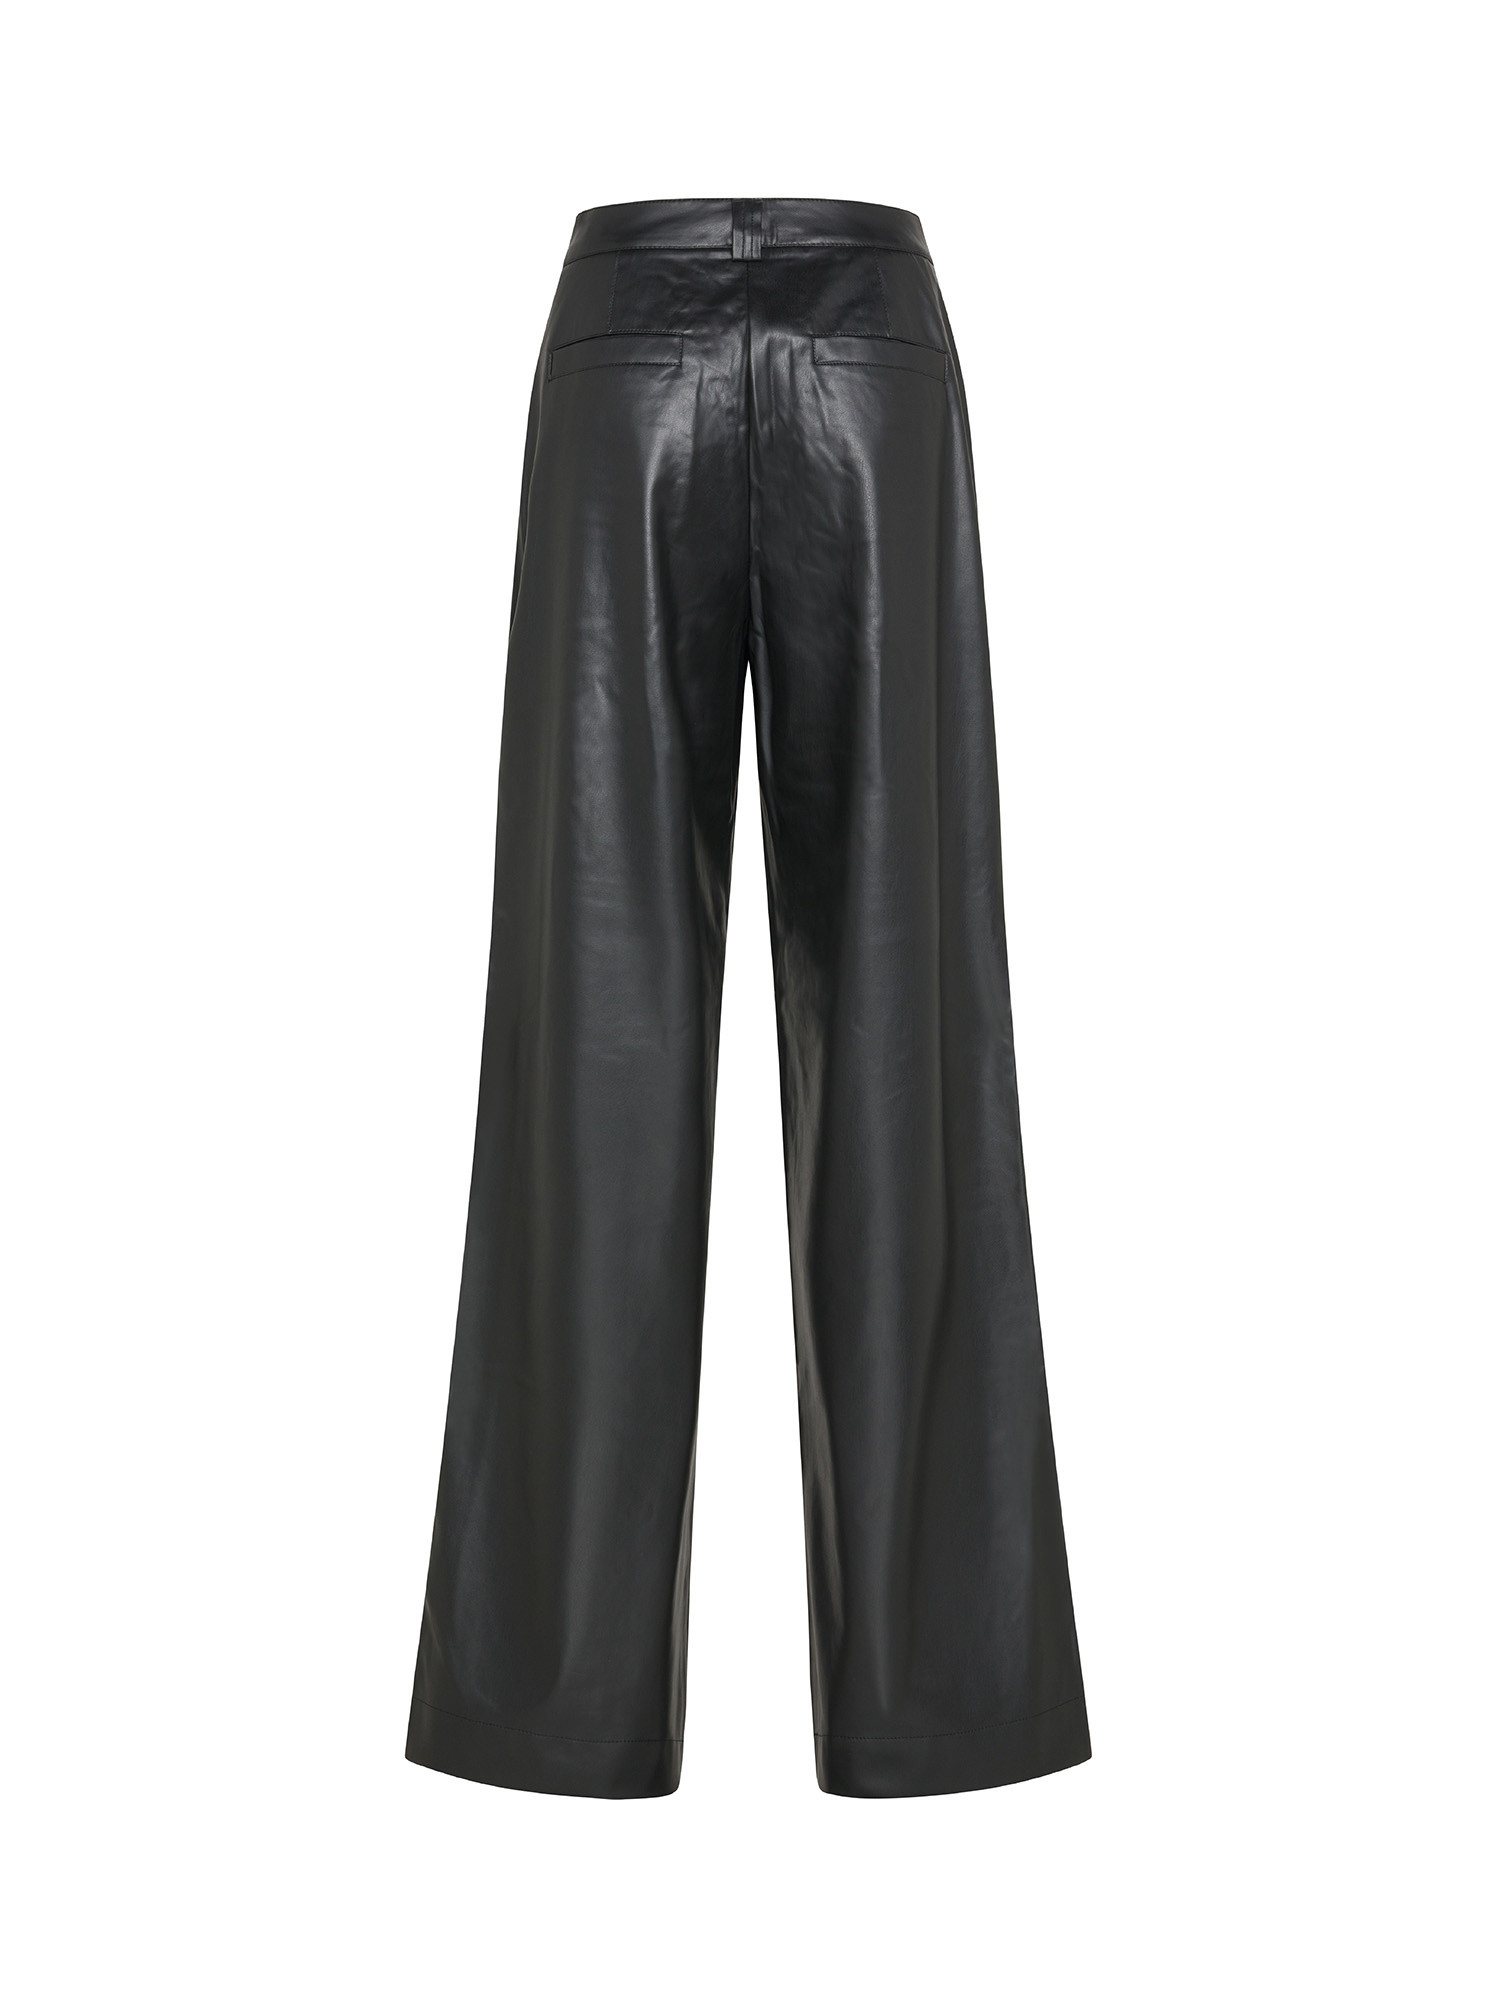 Faux leather trousers, Black, large image number 1